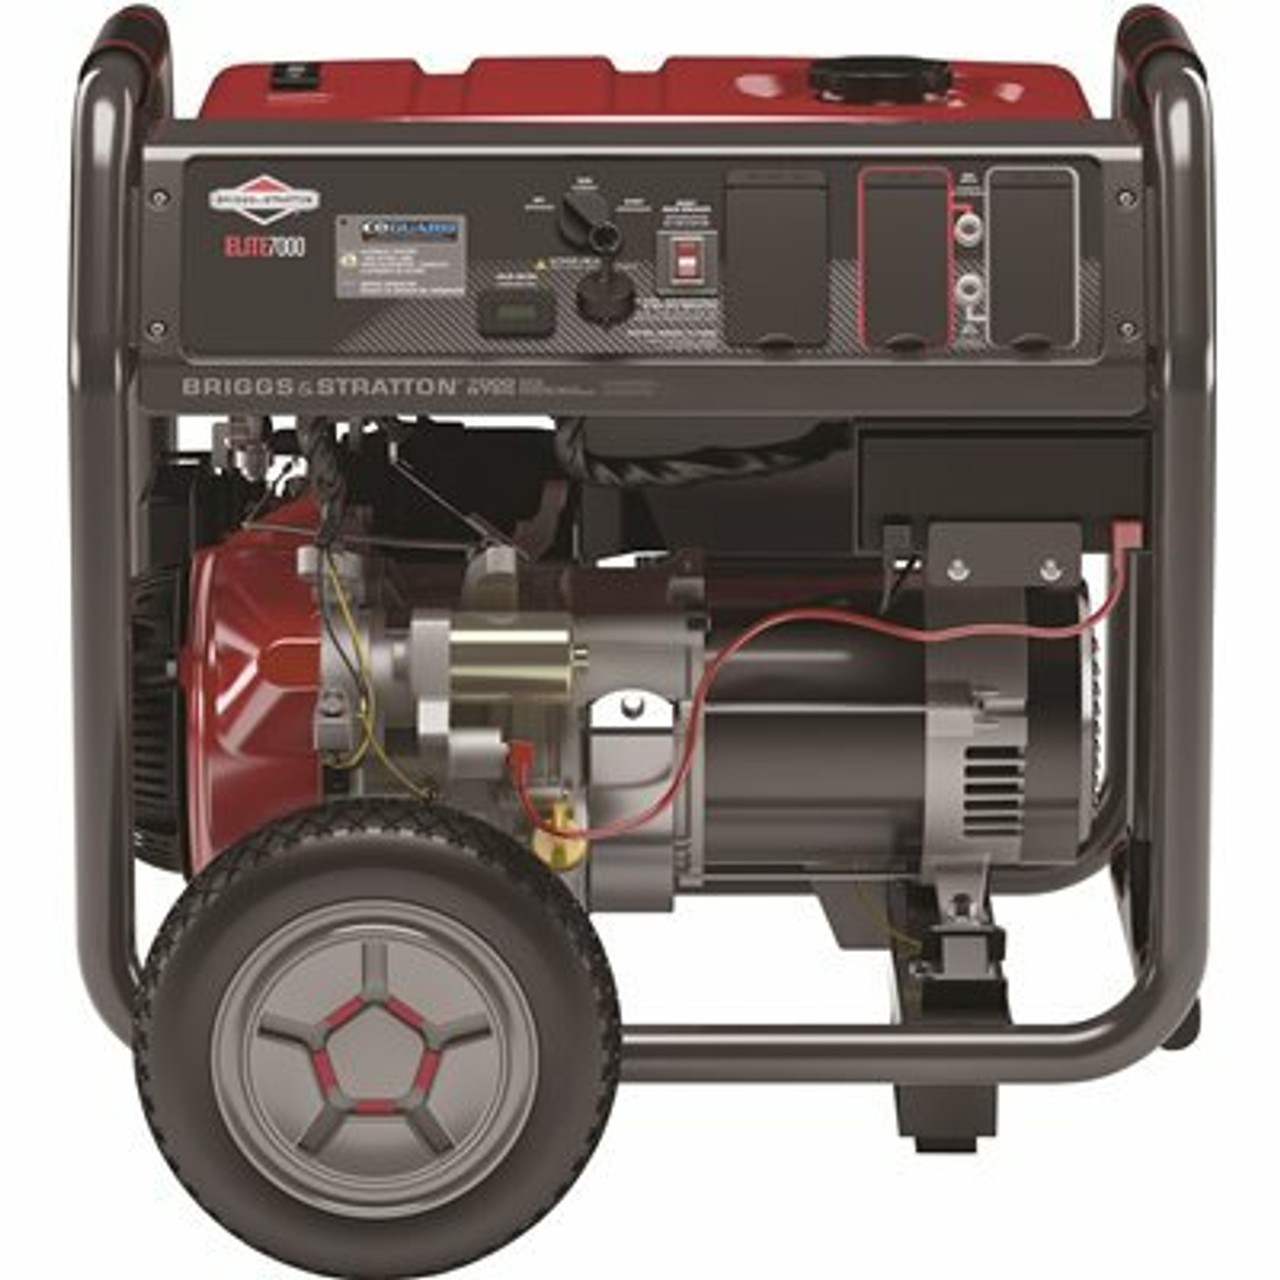 7,000-Watt Key Electric Start Gasoline Powered Portable Generator With Briggs & Stratton Ohv Engine Featuring Co Guard